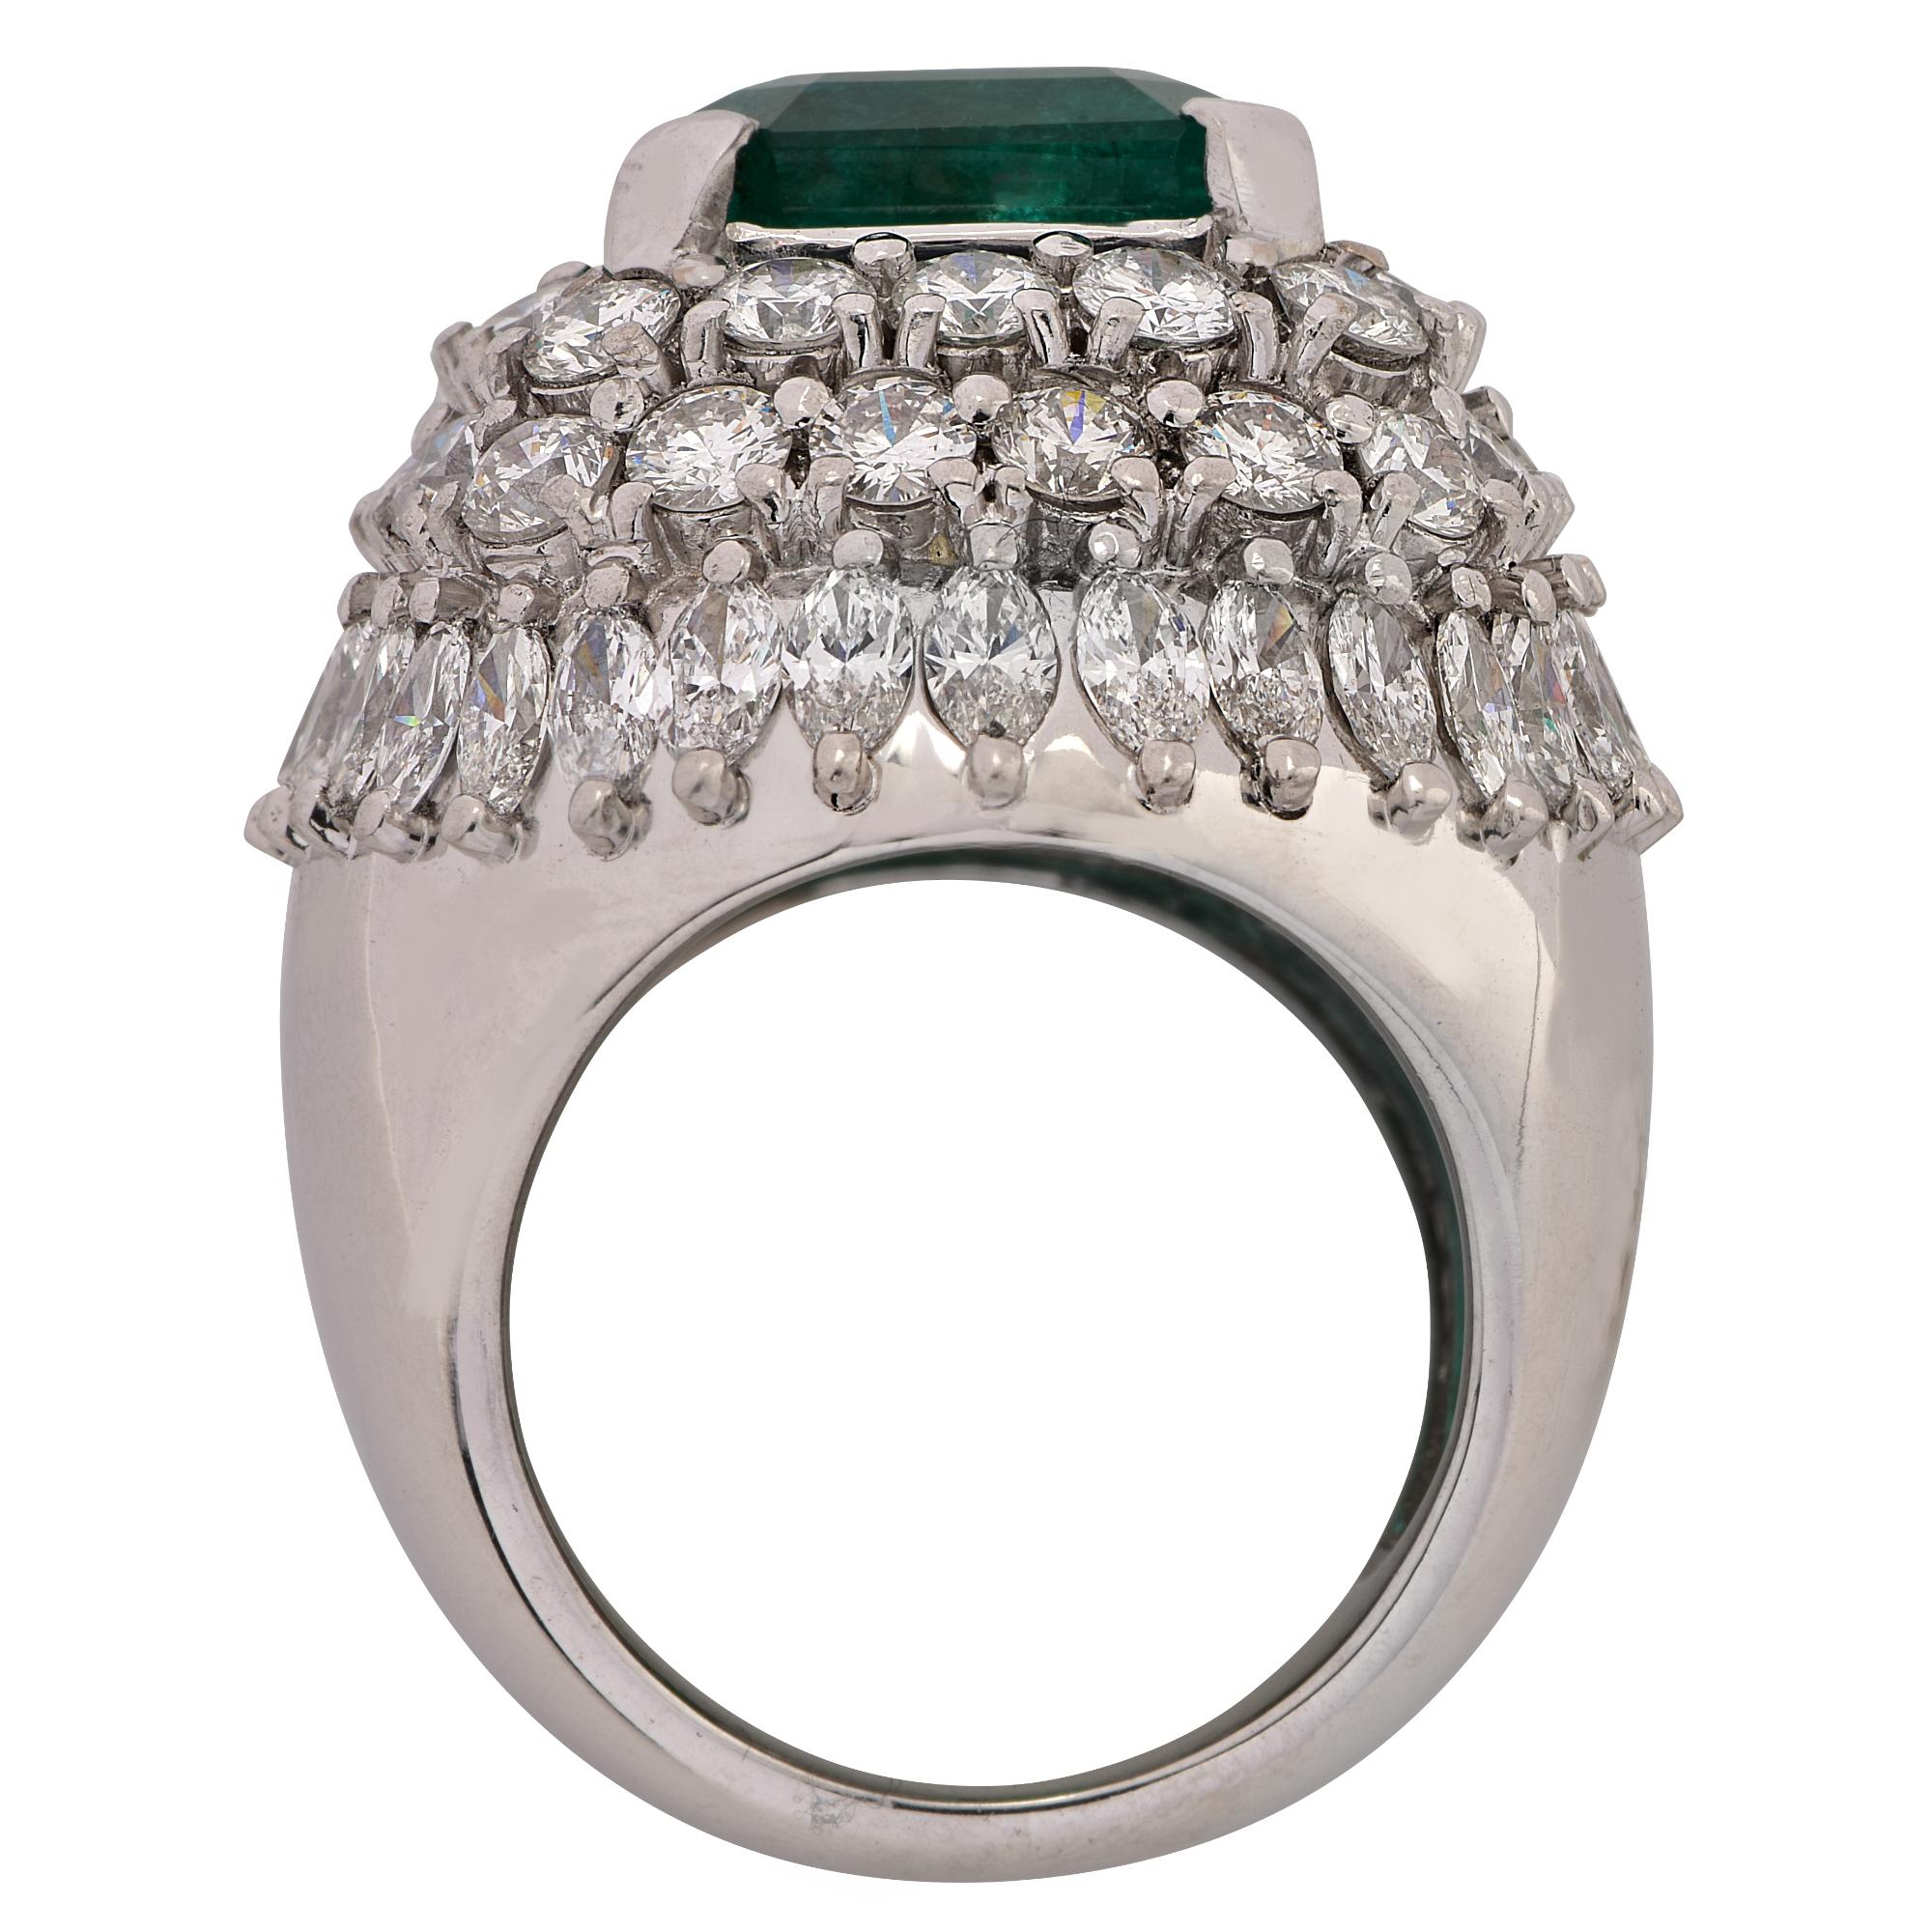 Stunning ring crafted in 18 karat white gold featuring a vibrant green emerald cut emerald weighing 9.51 carats, surrounded by 36 round brilliant cut diamonds weighing approximately 5 carats, G color, VS clarity, and 32 marquise cut diamonds